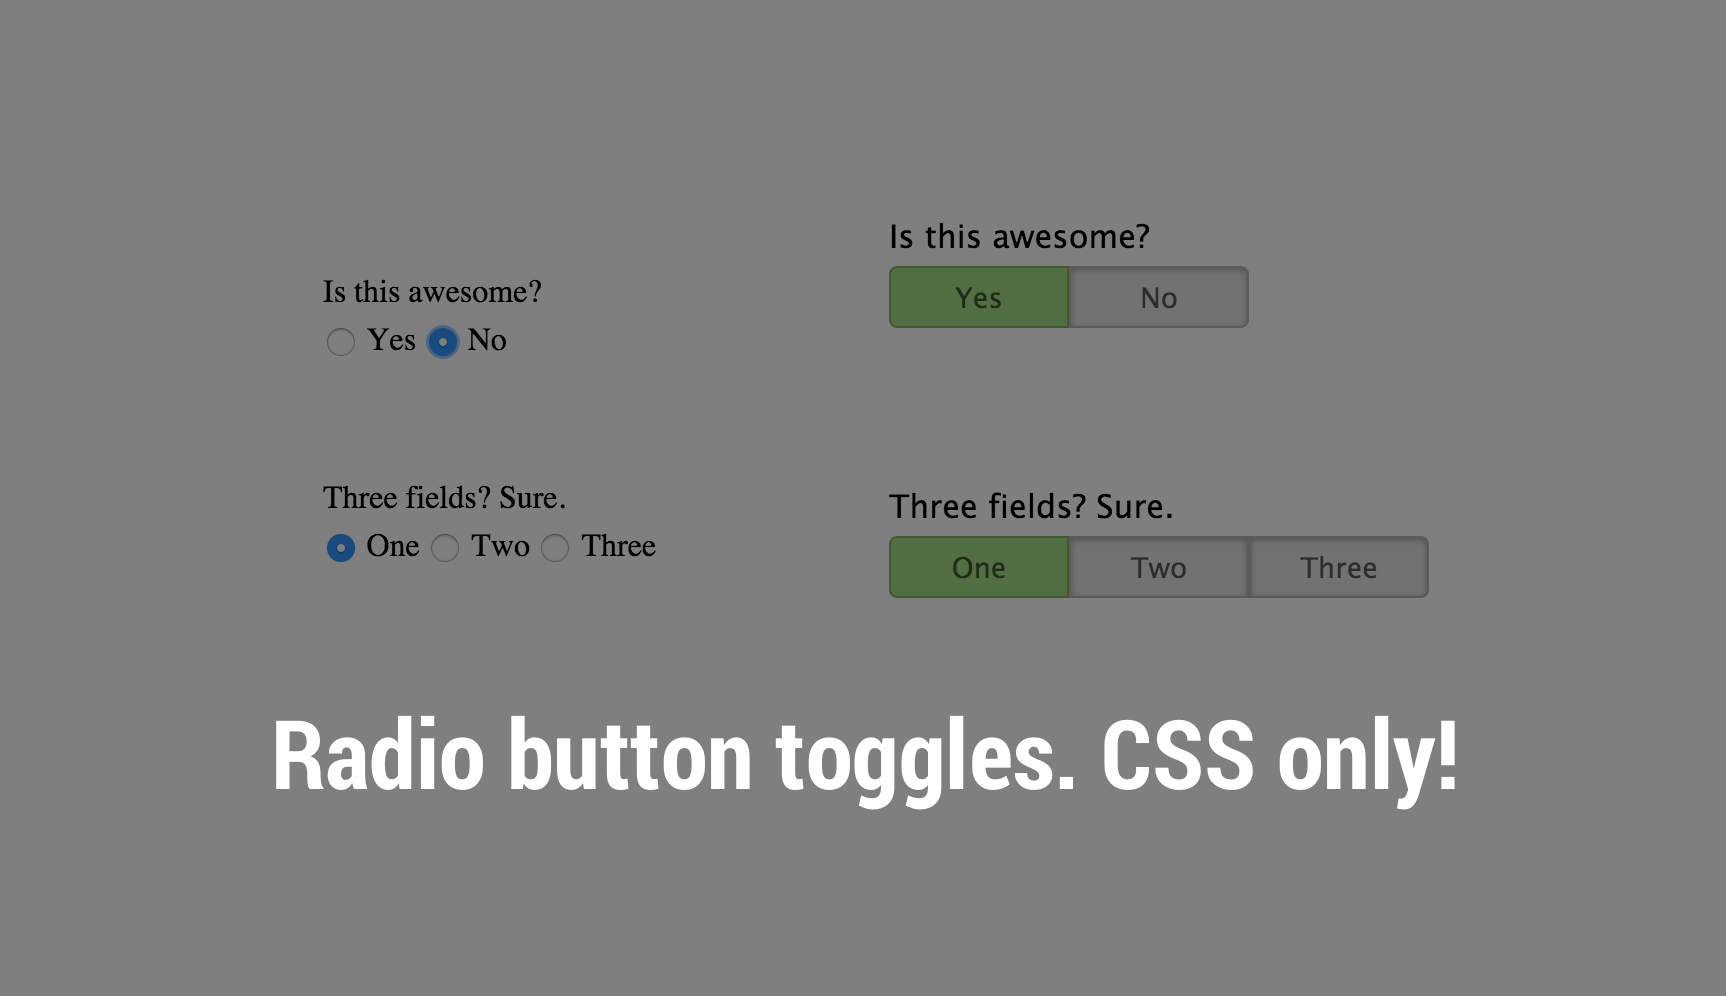 Canal rompecabezas Ilustrar Radio buttons as toggle buttons with CSS - The Stiz Media, LLC